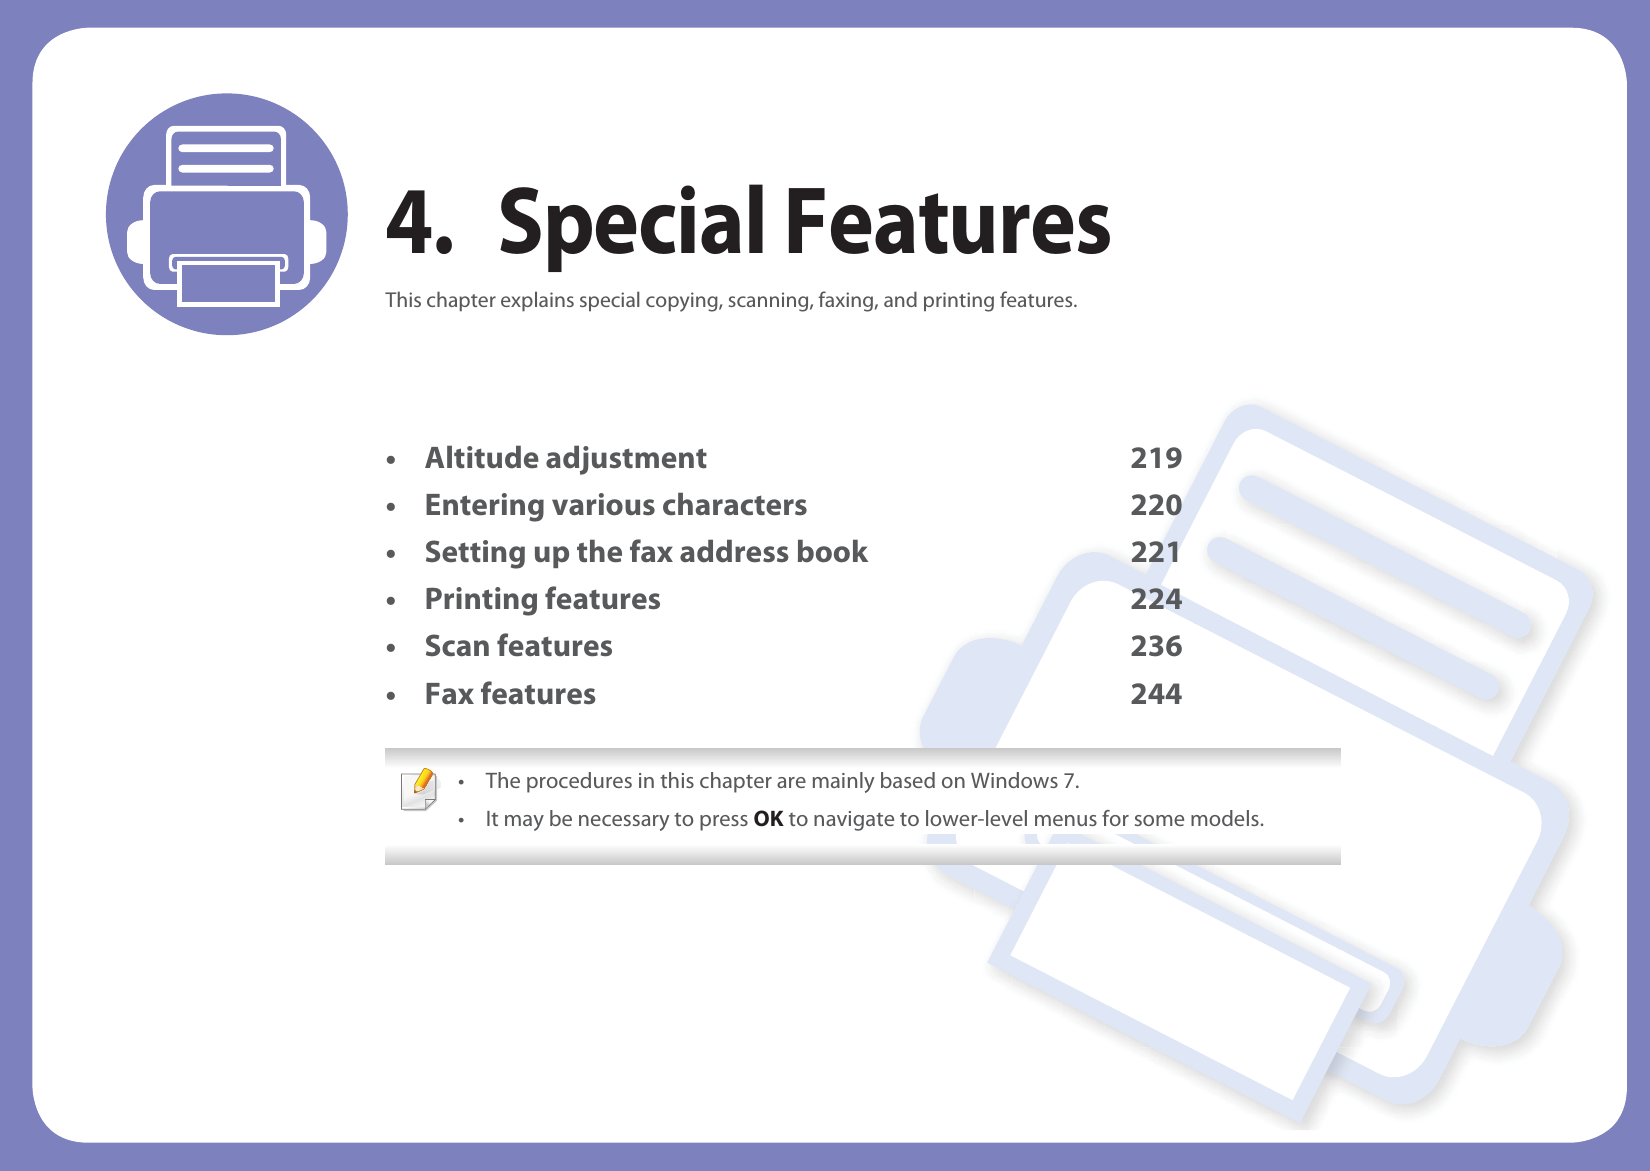 4. Special FeaturesThis chapter explains special copying, scanning, faxing, and printing features.• Altitude adjustment 219• Entering various characters 220• Setting up the fax address book 221• Printing features 224• Scan features 236• Fax features 244 • The procedures in this chapter are mainly based on Windows 7.• It may be necessary to press OK to navigate to lower-level menus for some models. 